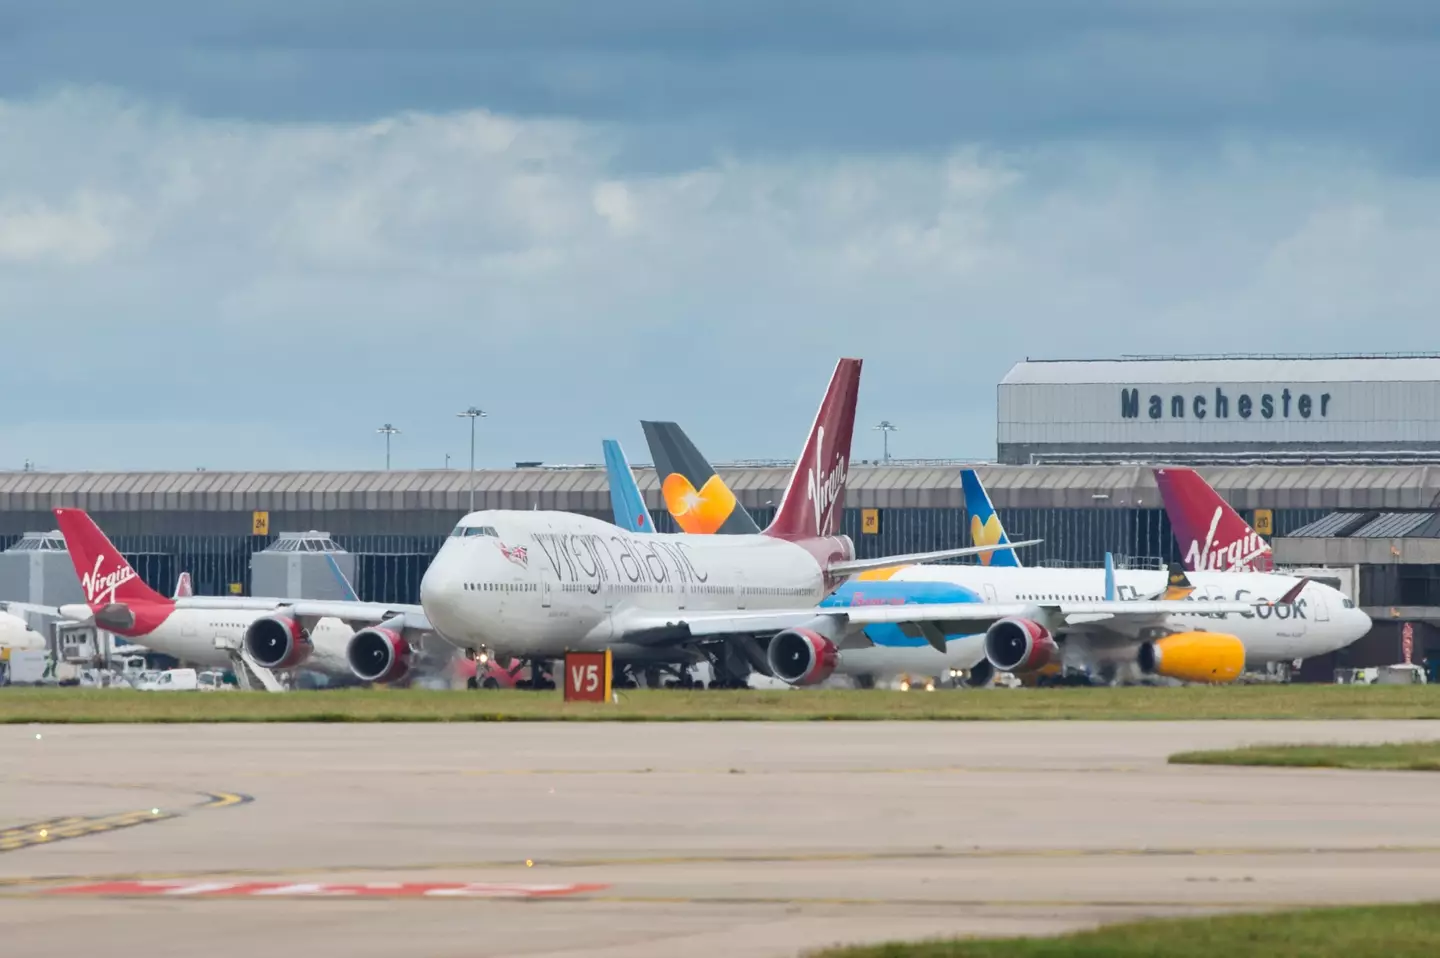 A major UK airport has been forced to close its runways.